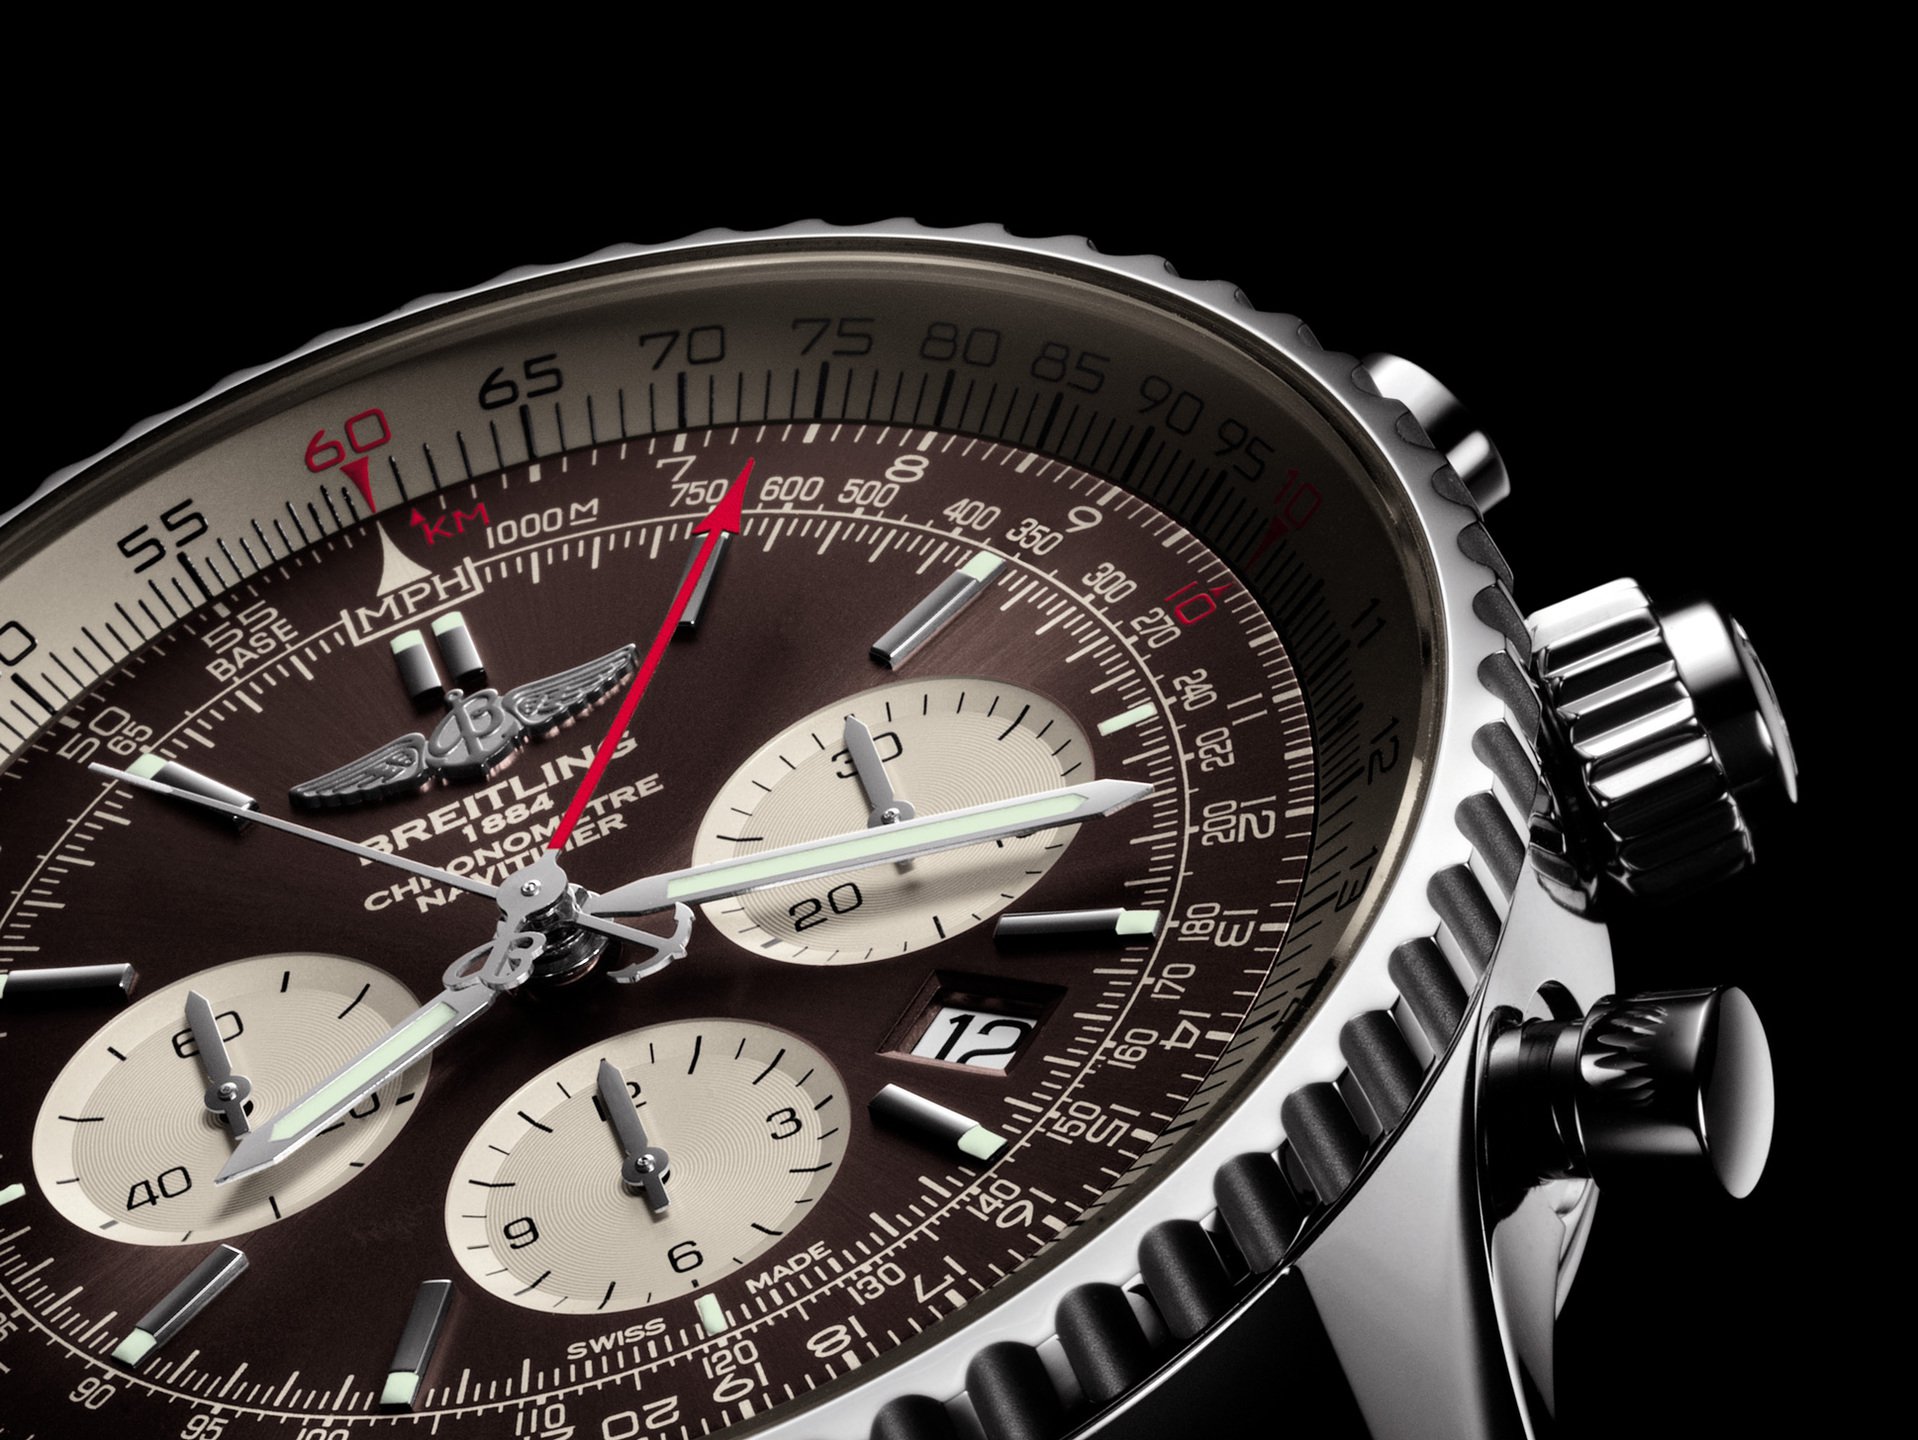 breitling Super Ocean Heritage '57 is outside the well-known limited edition